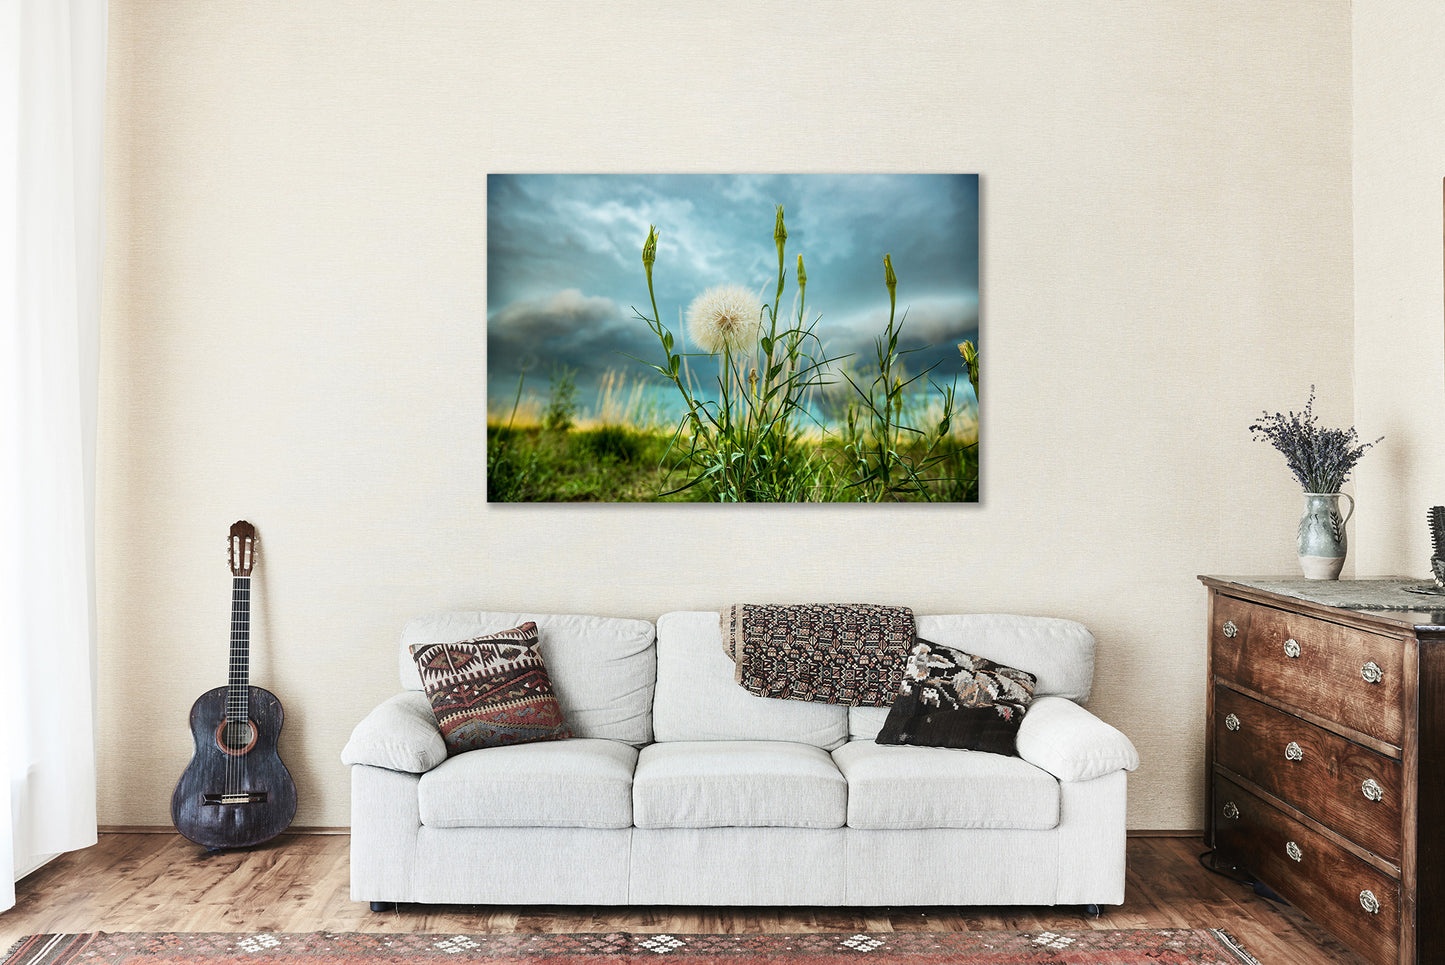 Botanical Metal Print (Ready to Hang) Photo on Aluminum of Goats Beard Dandelion on Stormy Day in Colorado Great Plains Wall Art Nature Decor